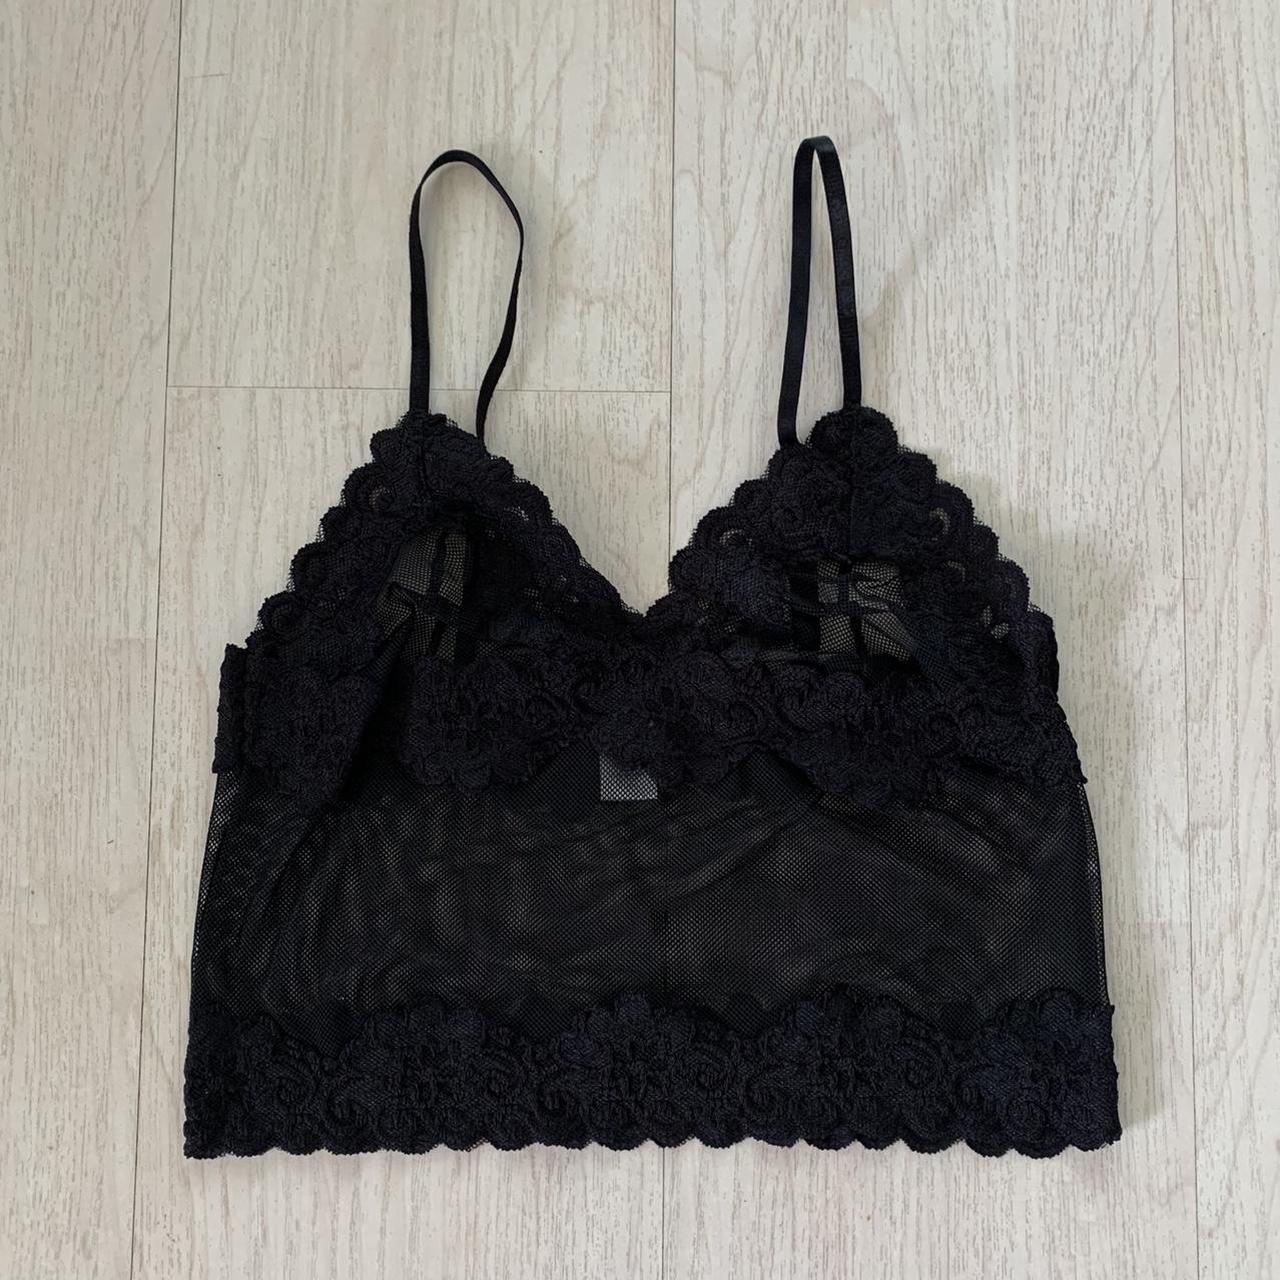 Early 2000s y2k black lace and sheer mesh cropped - Depop